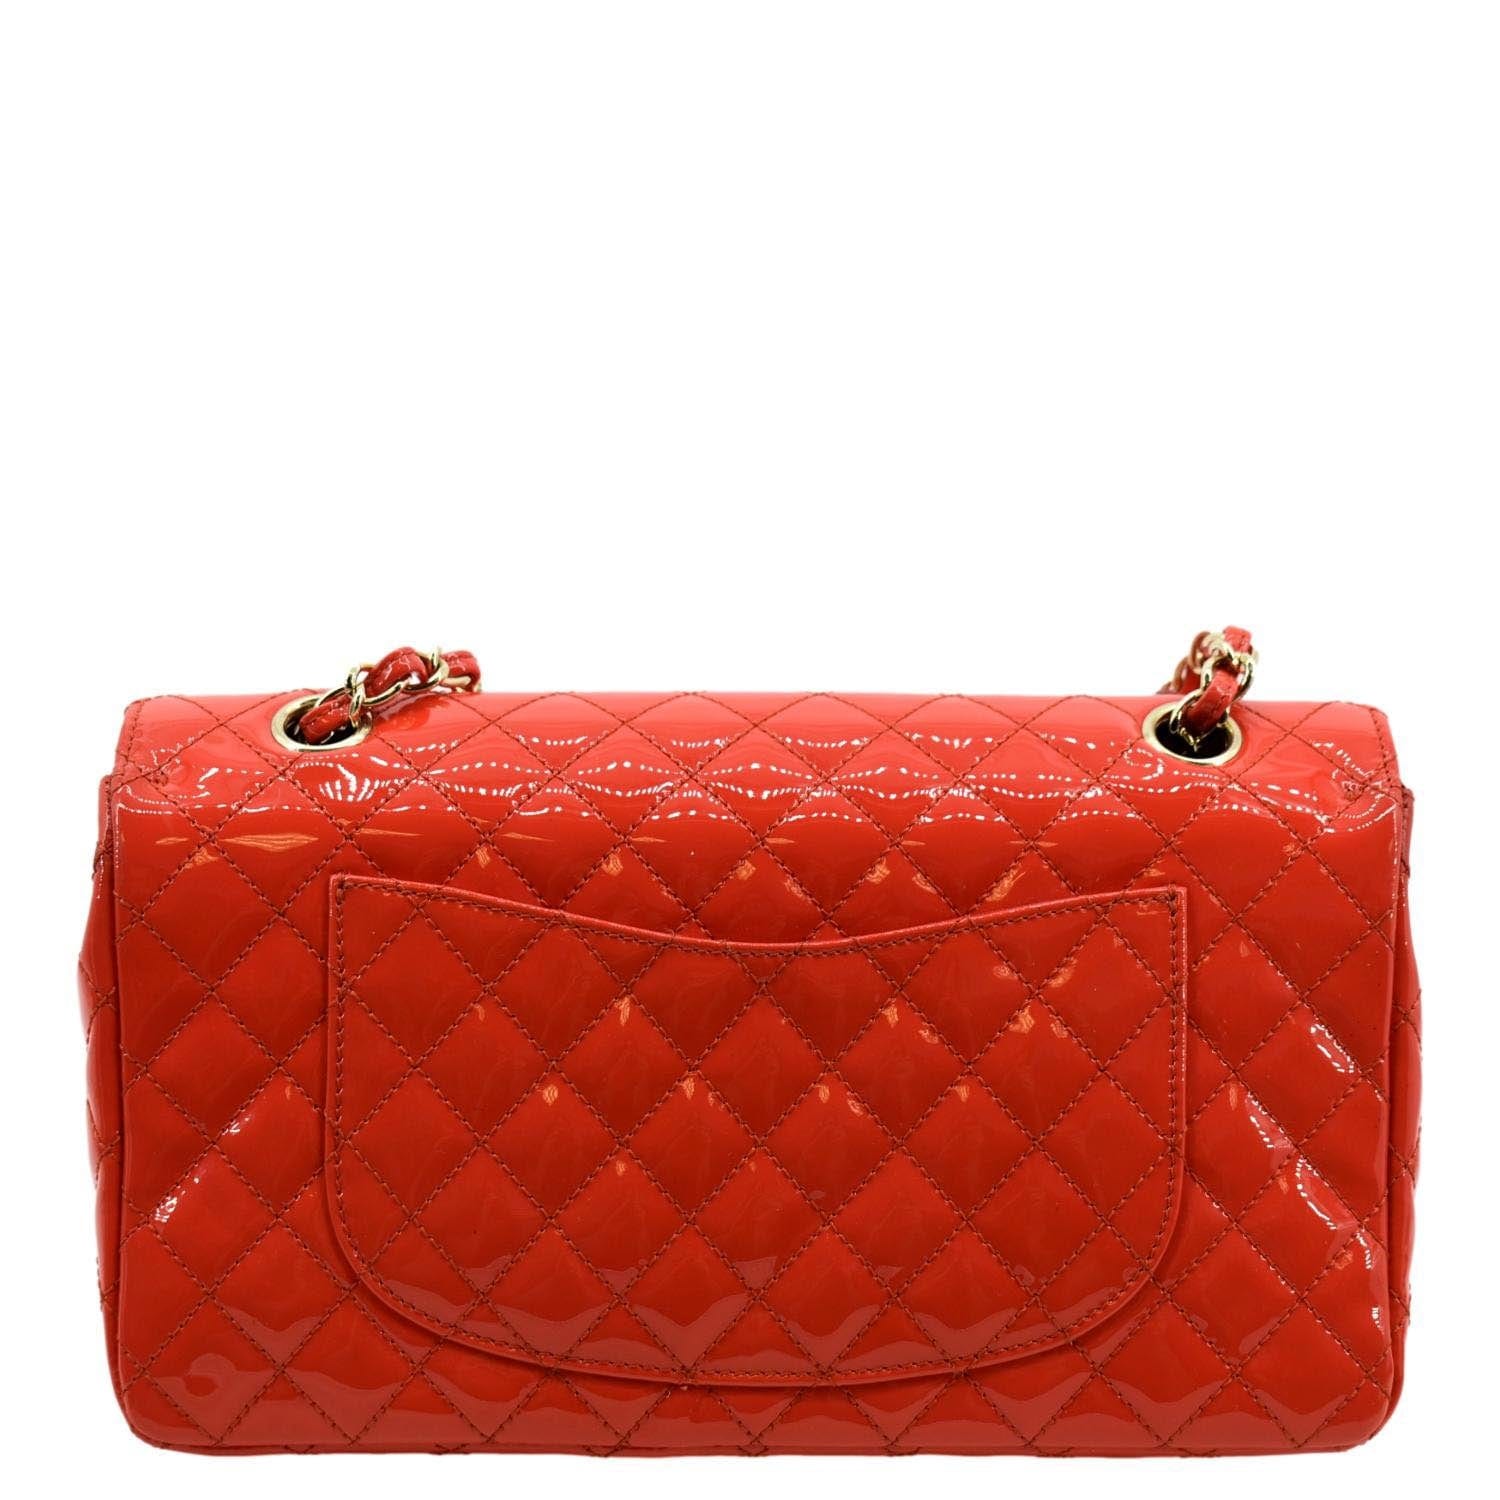 Chanel Patent Calfskin Quilted Medium Double Flap Red